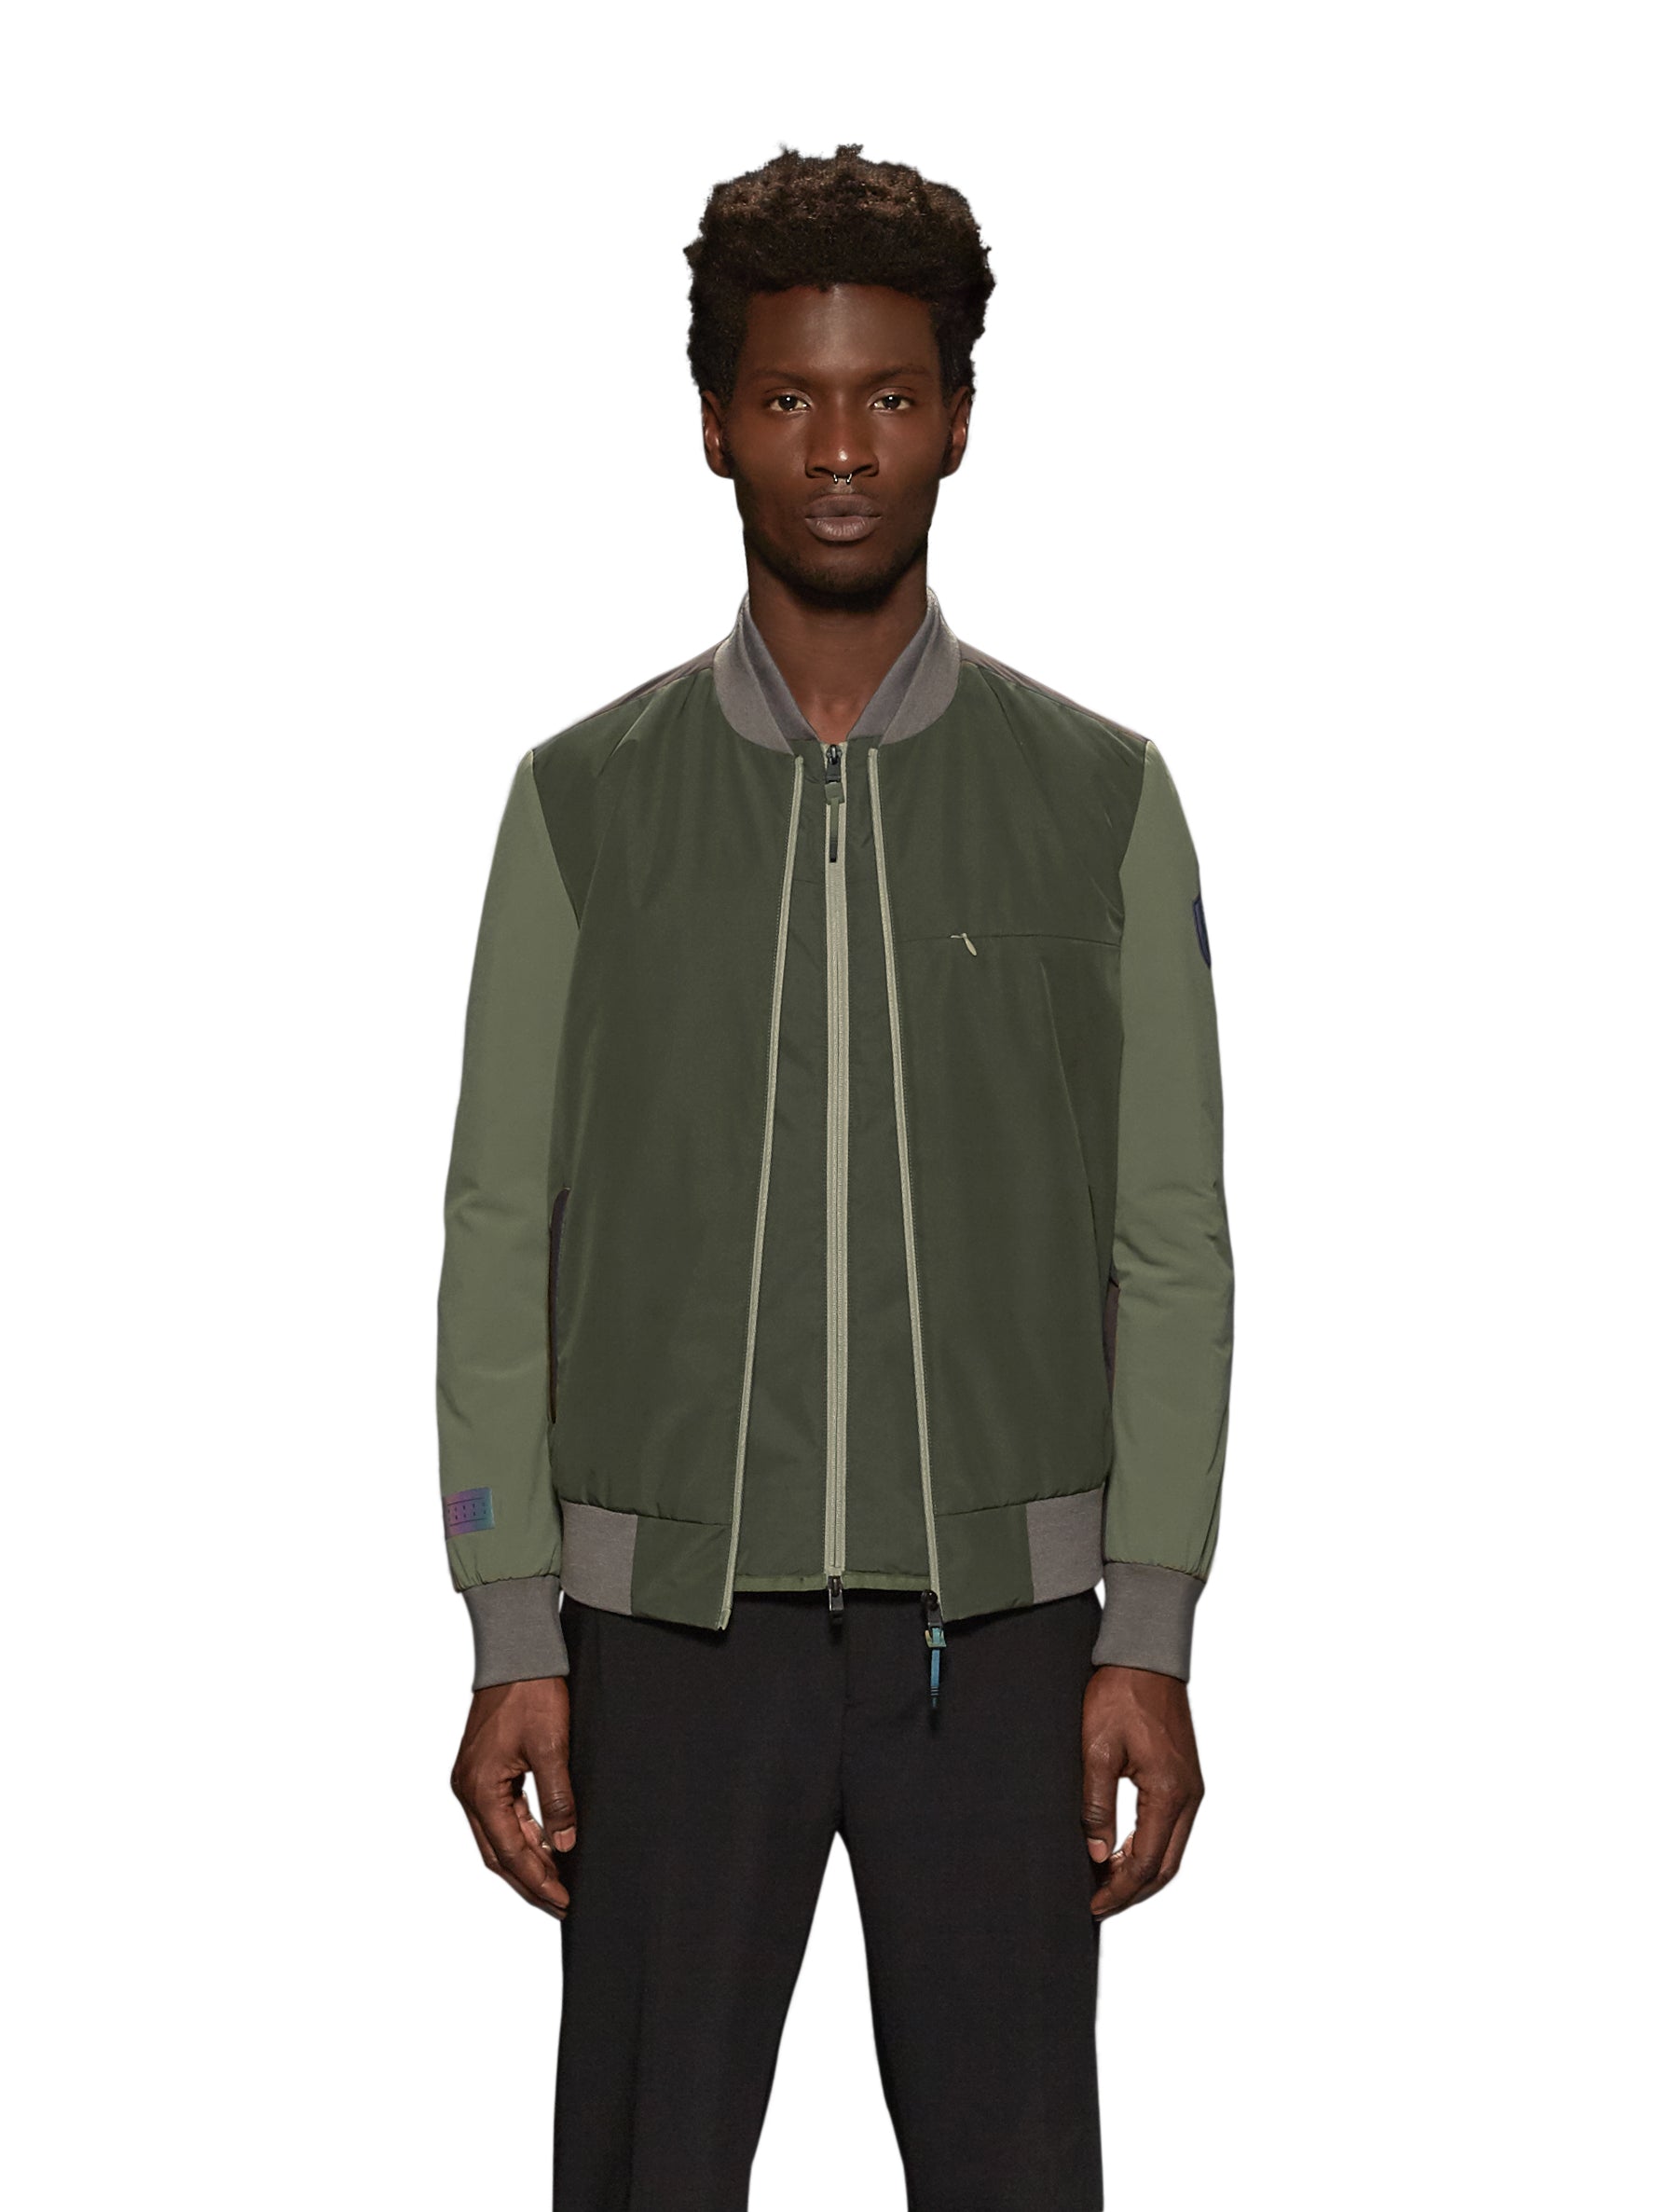 Unisex hip length bomber jacket with a contrast colour back panel, and zipper pockets at waist and an invisible zipper pocket at chest, in Dusty Olive/Licorice